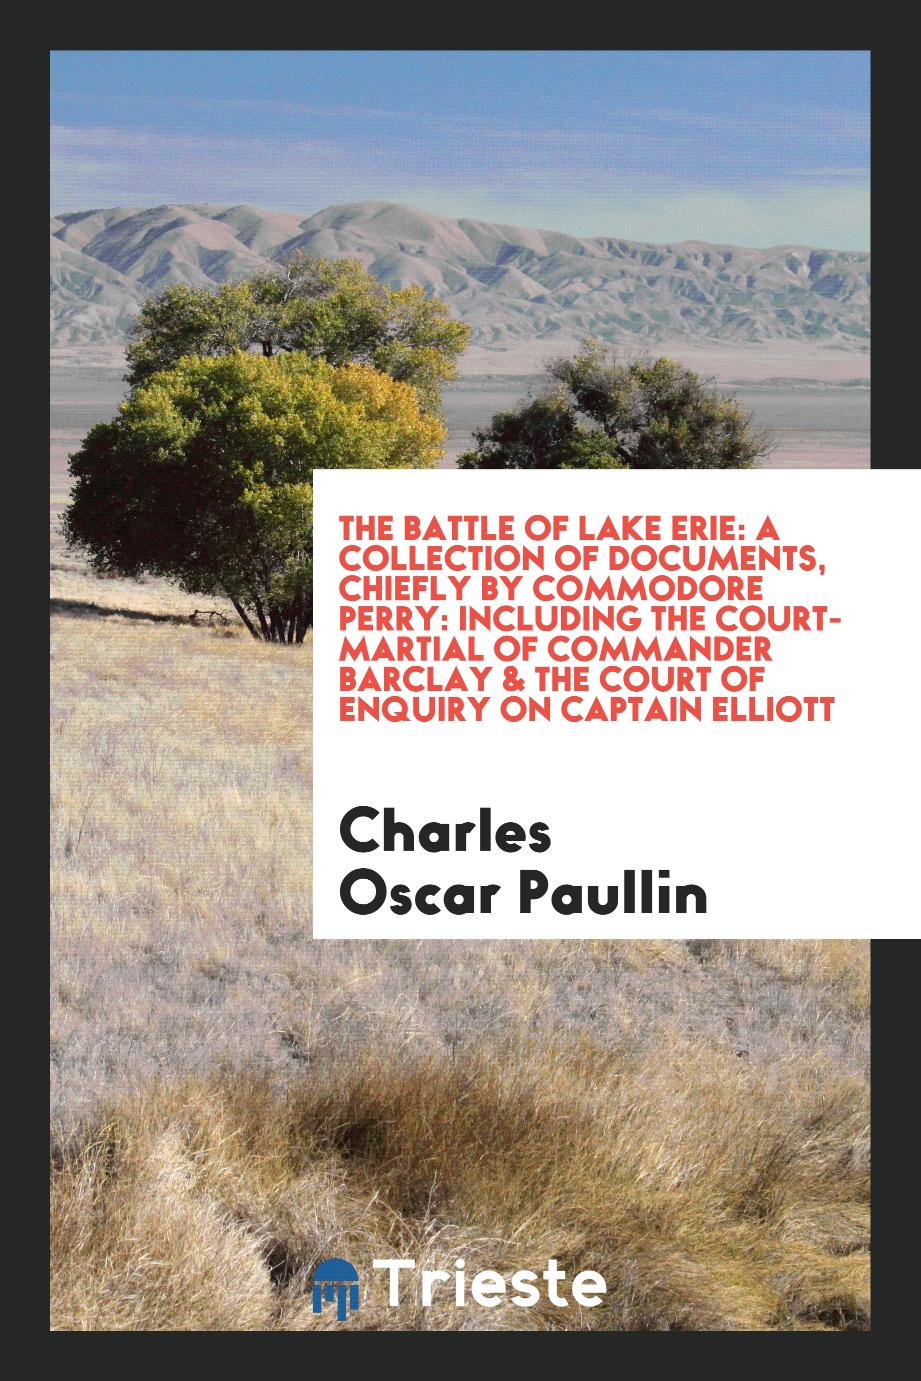 The battle of Lake Erie: a collection of documents, chiefly by Commodore Perry: including the court-martial of Commander Barclay & the court of enquiry on Captain Elliott